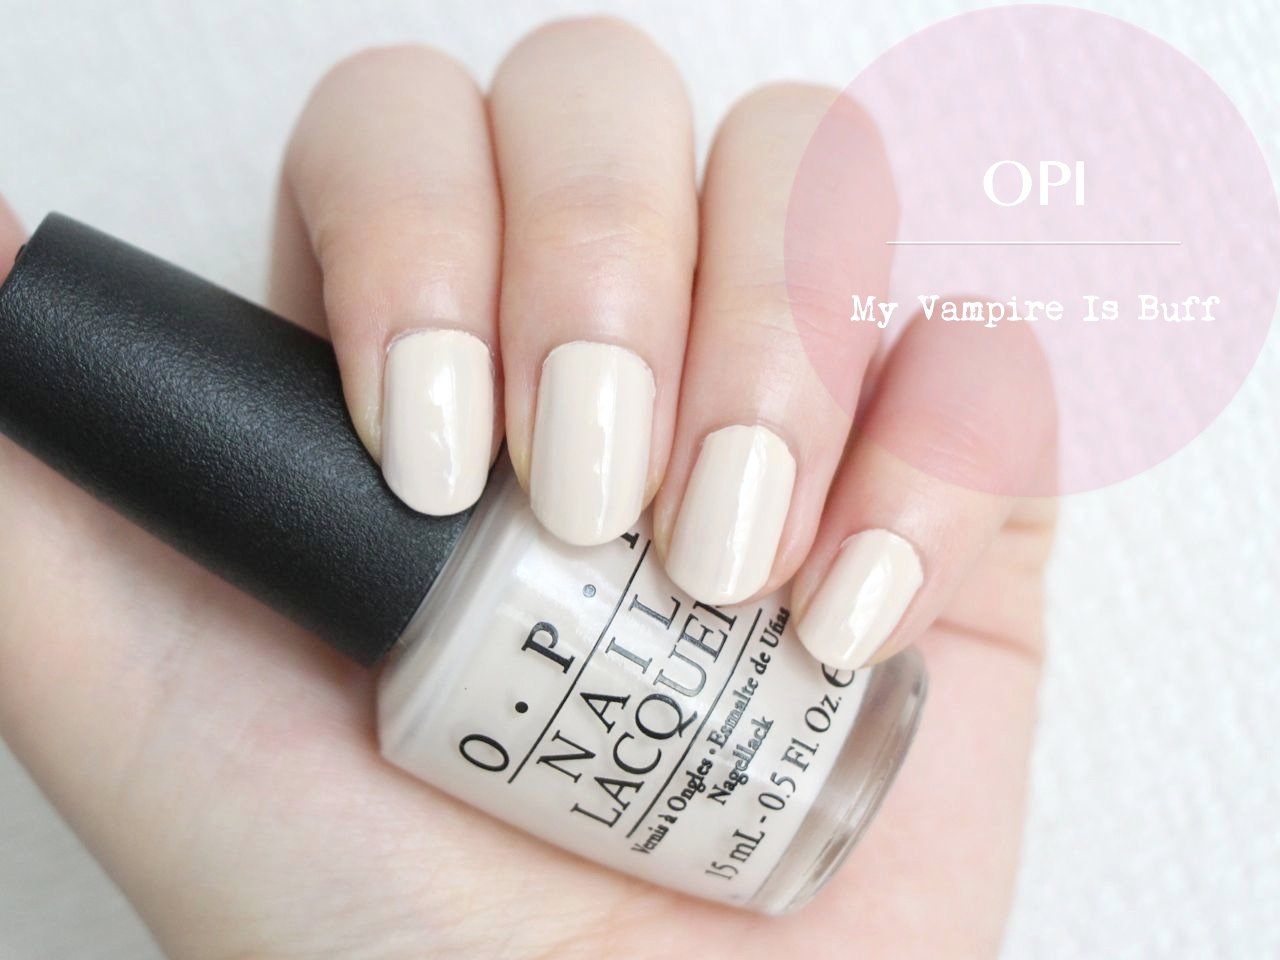 OPI Nail Lacquer, My Vampire is Buff - wide 10